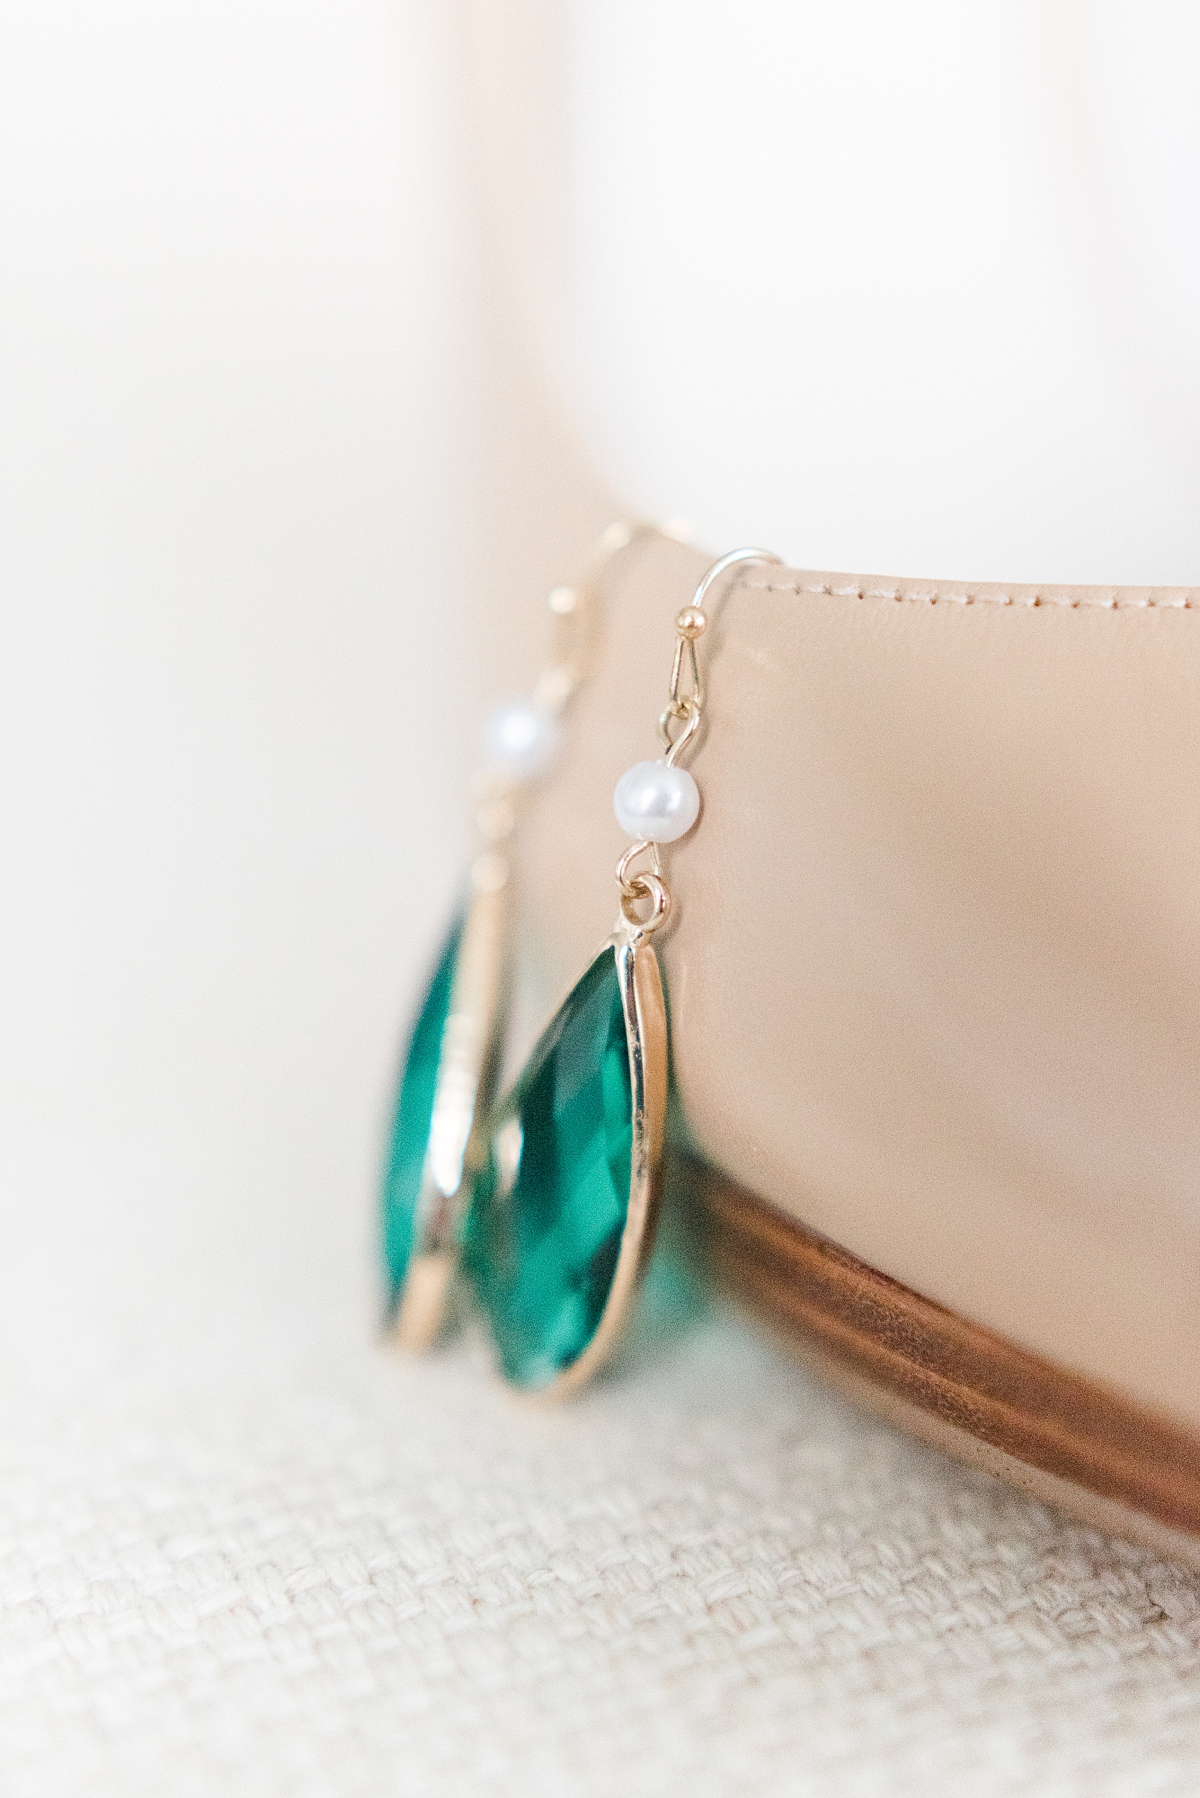 Bridal Details of Emerald Earrings at Intimate Richmond Elopement. Wedding Photography by Richmond Wedding Photographer Kailey Brianne Photography. 